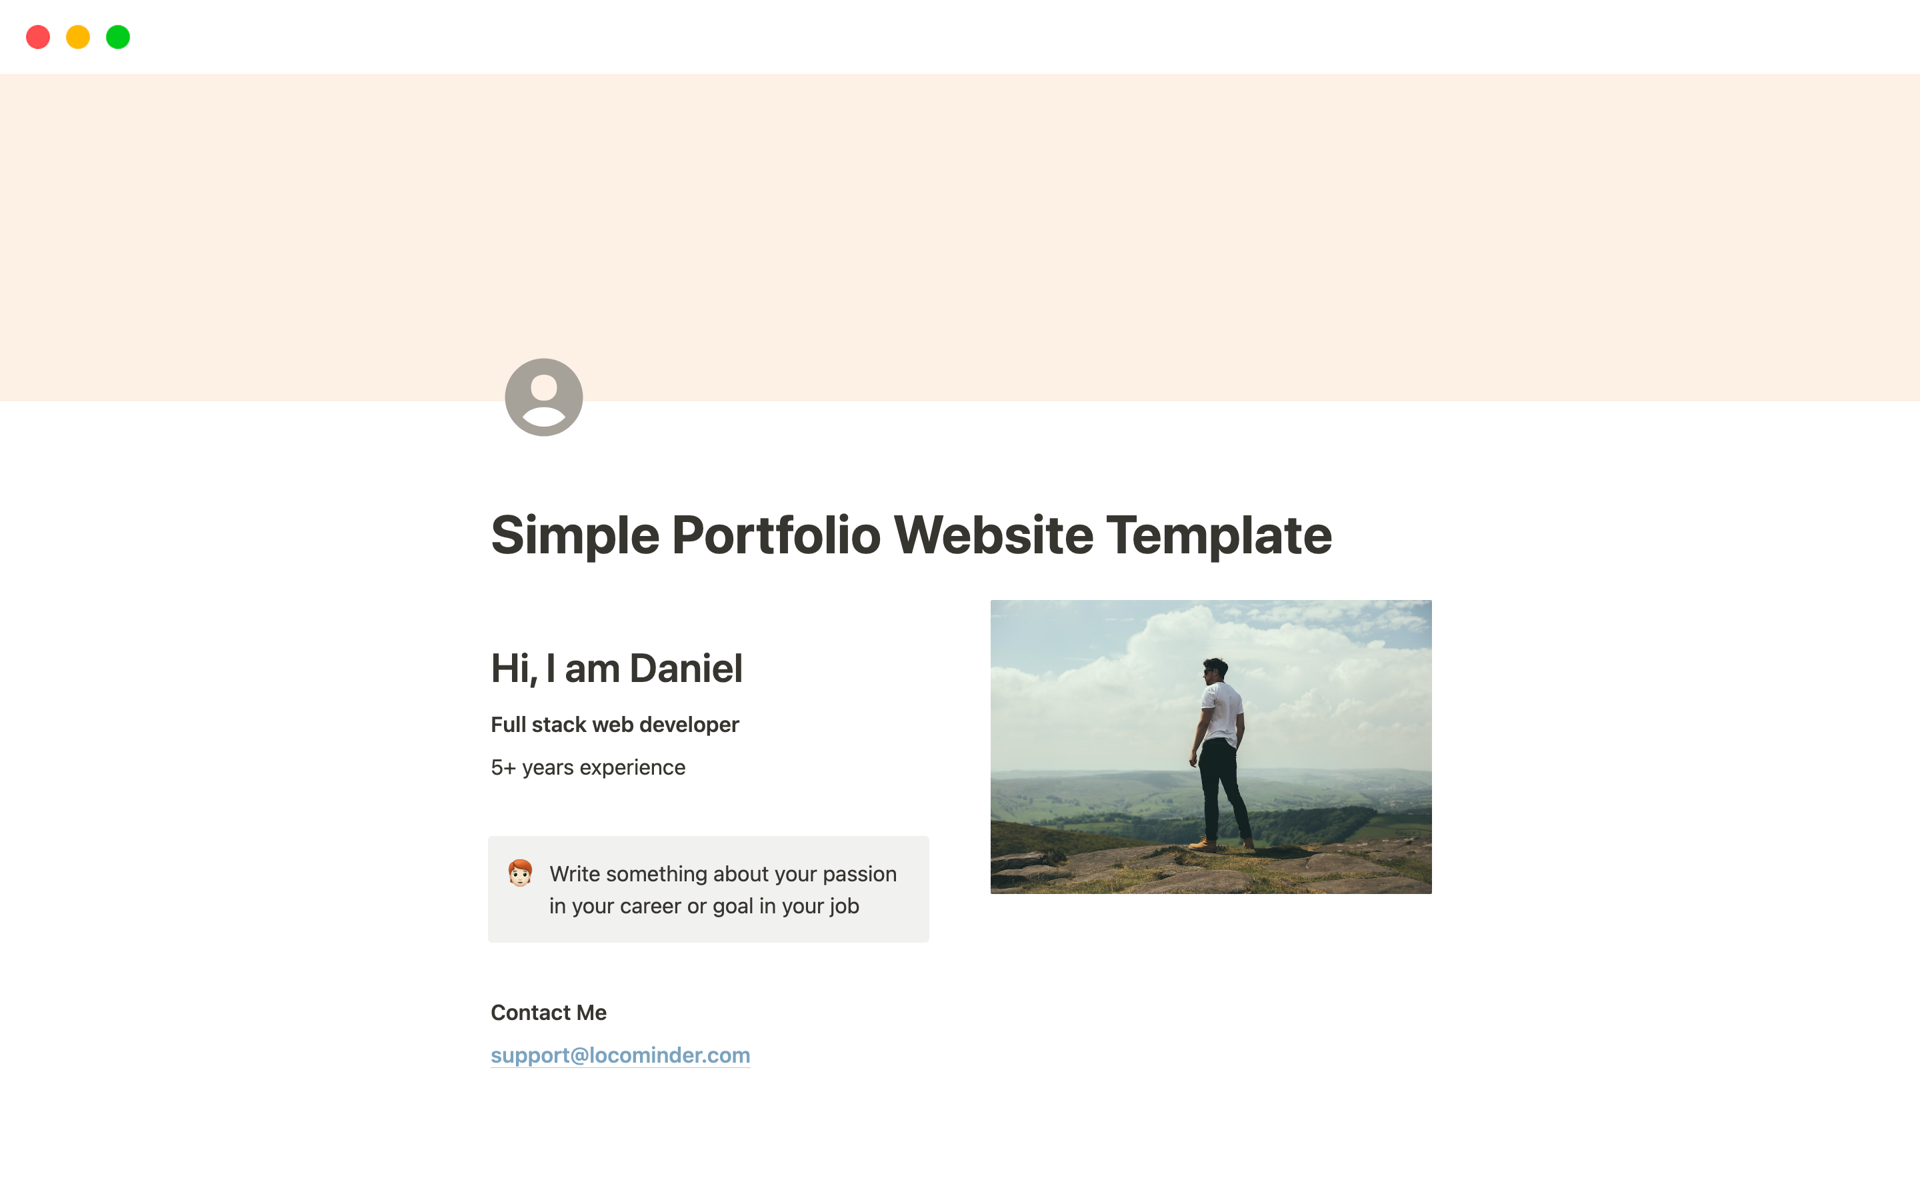 Screenshot of Top Free Portfolio Templates in Notion collection by Notion